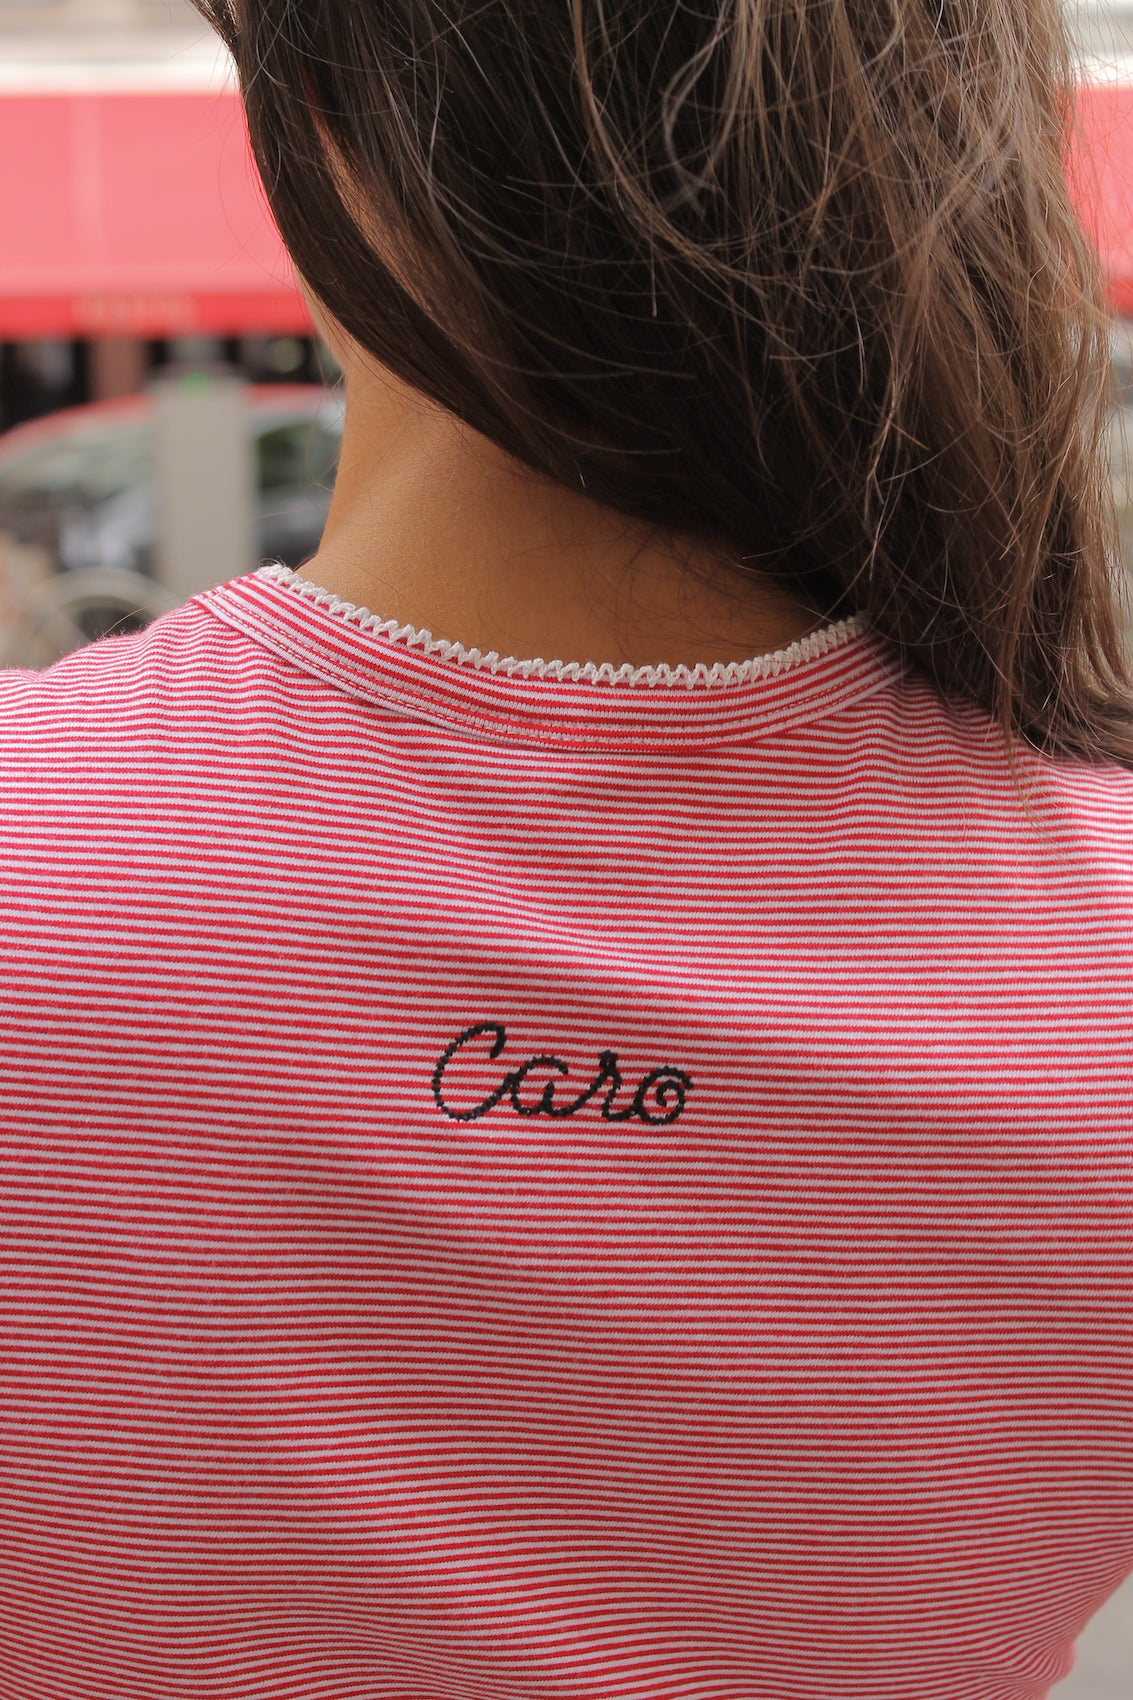 Caro Editions' new signature line in jersey cotton.  The Caro T-shirt is a fitted style with short sleeves, a ribbon bow detail at the front, and embroidered Caro Editions logo on the back.   Also available in White and Black White stripe.  Style the Caro T-shirt under shirts or dresses, or wear them on their own.  Material: 95% cotton, 5% elastane. Bow: 100% Polyester.  The model is 175cm (5'9") and is wearing a size S.